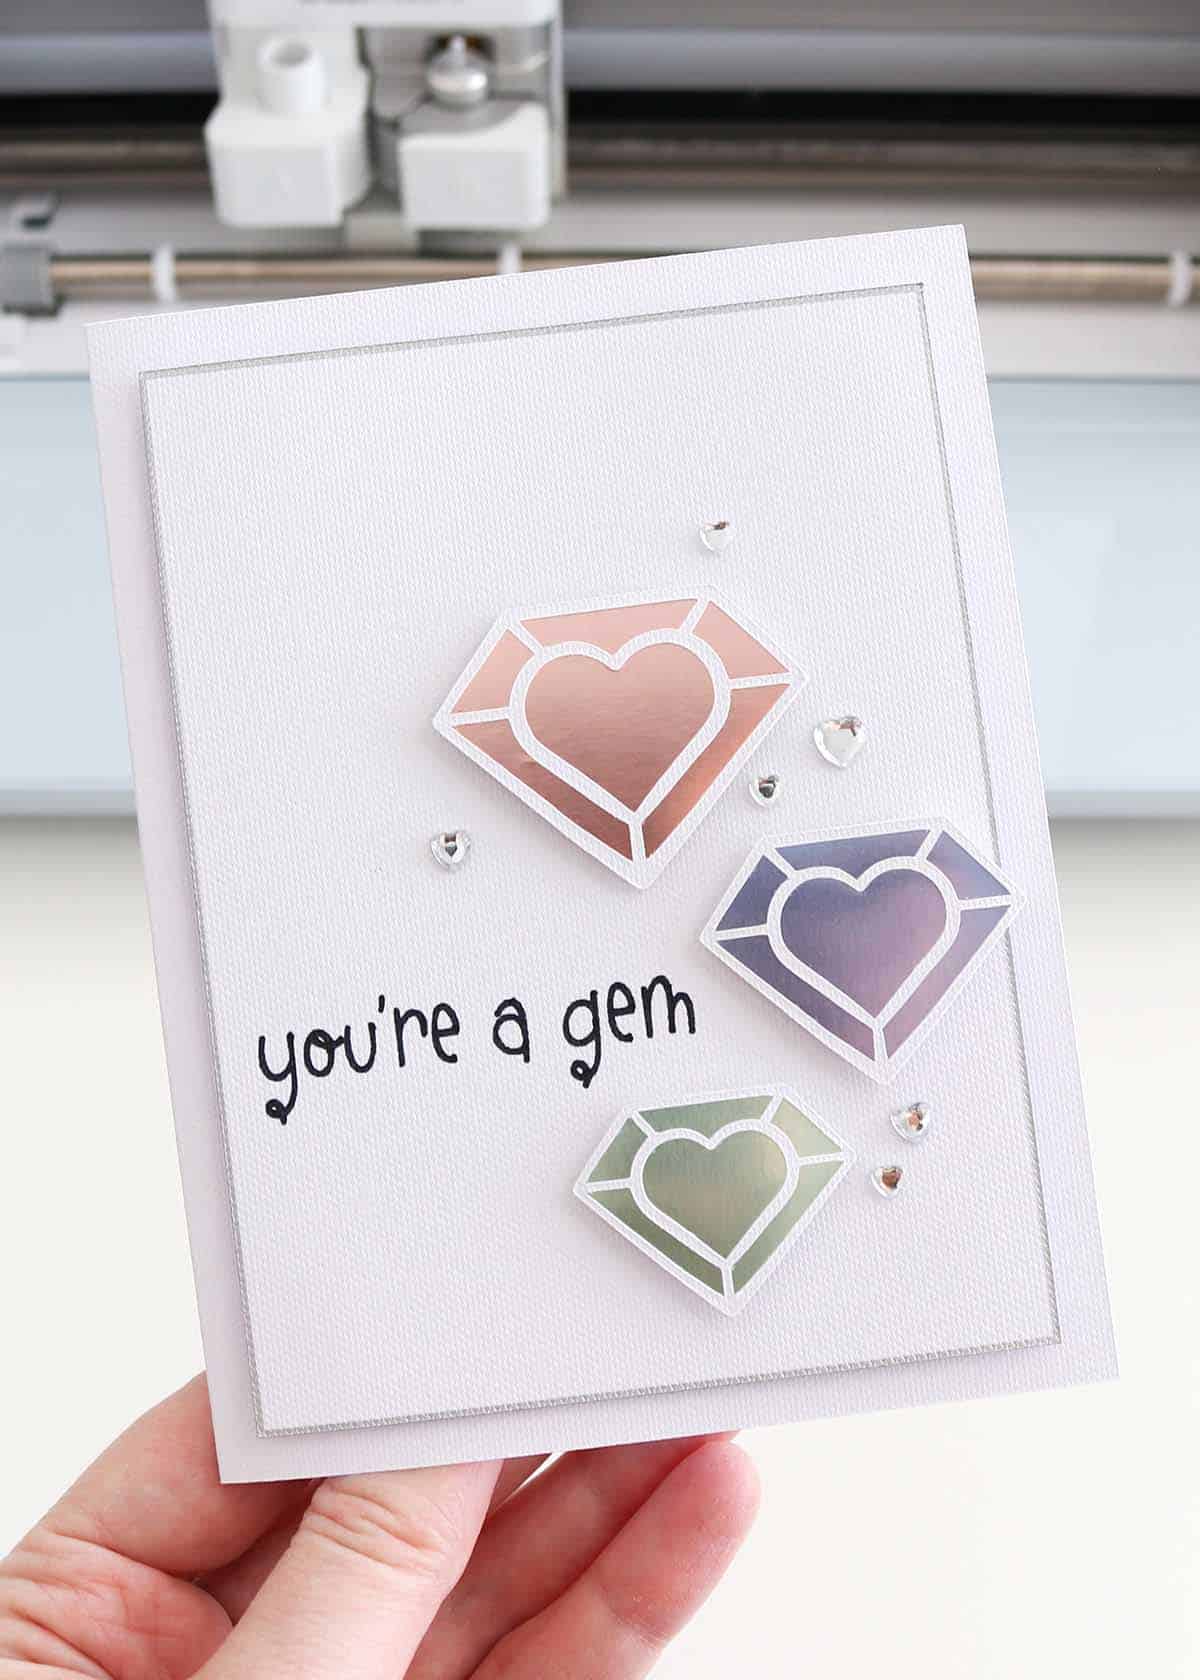 cricut valentines day card ideas: you're a gem sparkly valentine's card